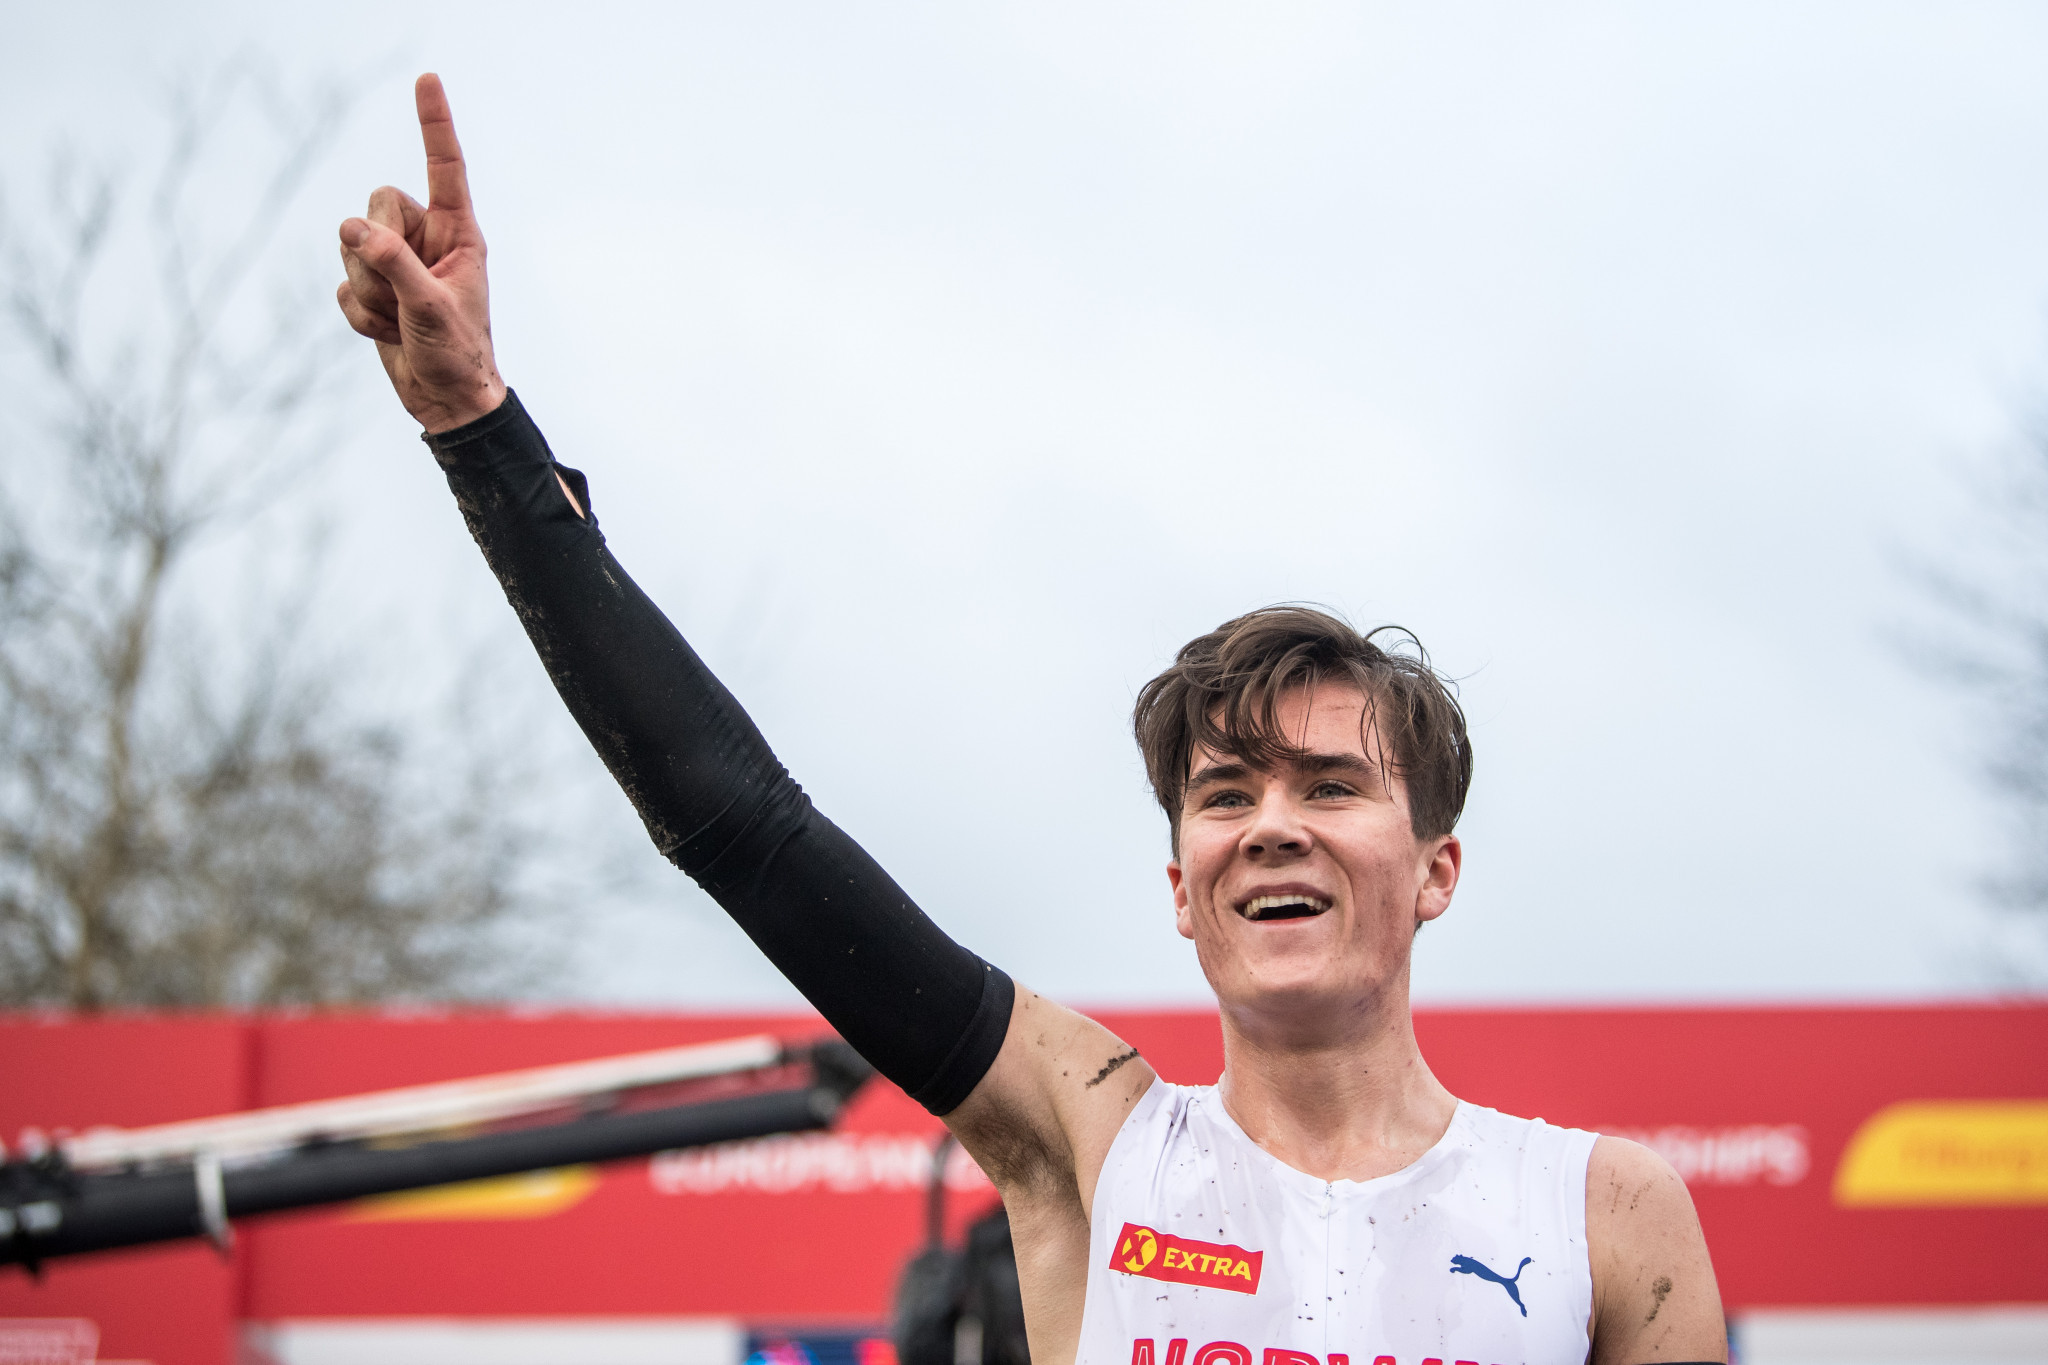 Filip and Jakob Ingebrigtsen to defend senior and under-20 titles at European Cross Country Championships   